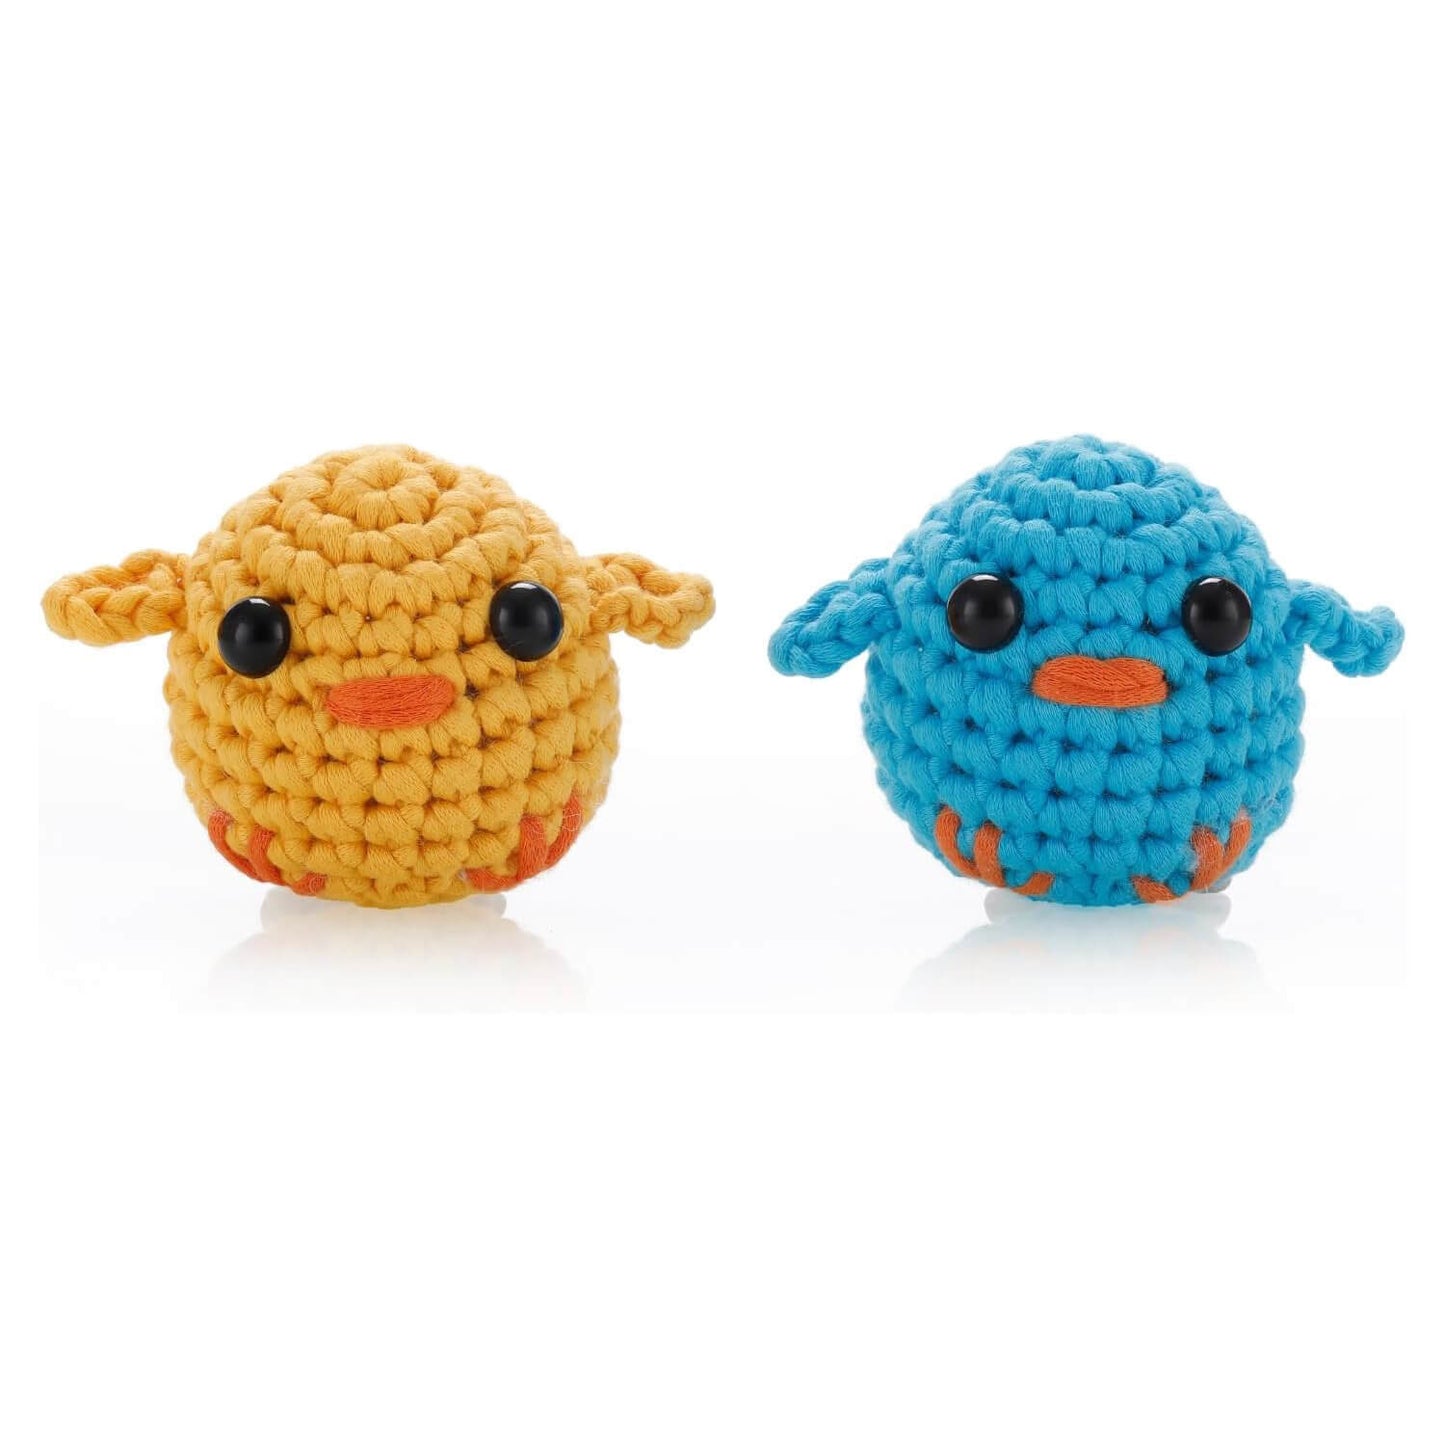 Chirpy Chick Crochet Kit for Beginners 2Pcs - Beginner Crochet Starter Kit for Complete Beginners Adults, Crocheting Knitting Kit with Step-by-Step Video Tutorialso Tutorials for Right- and Left-Handed People